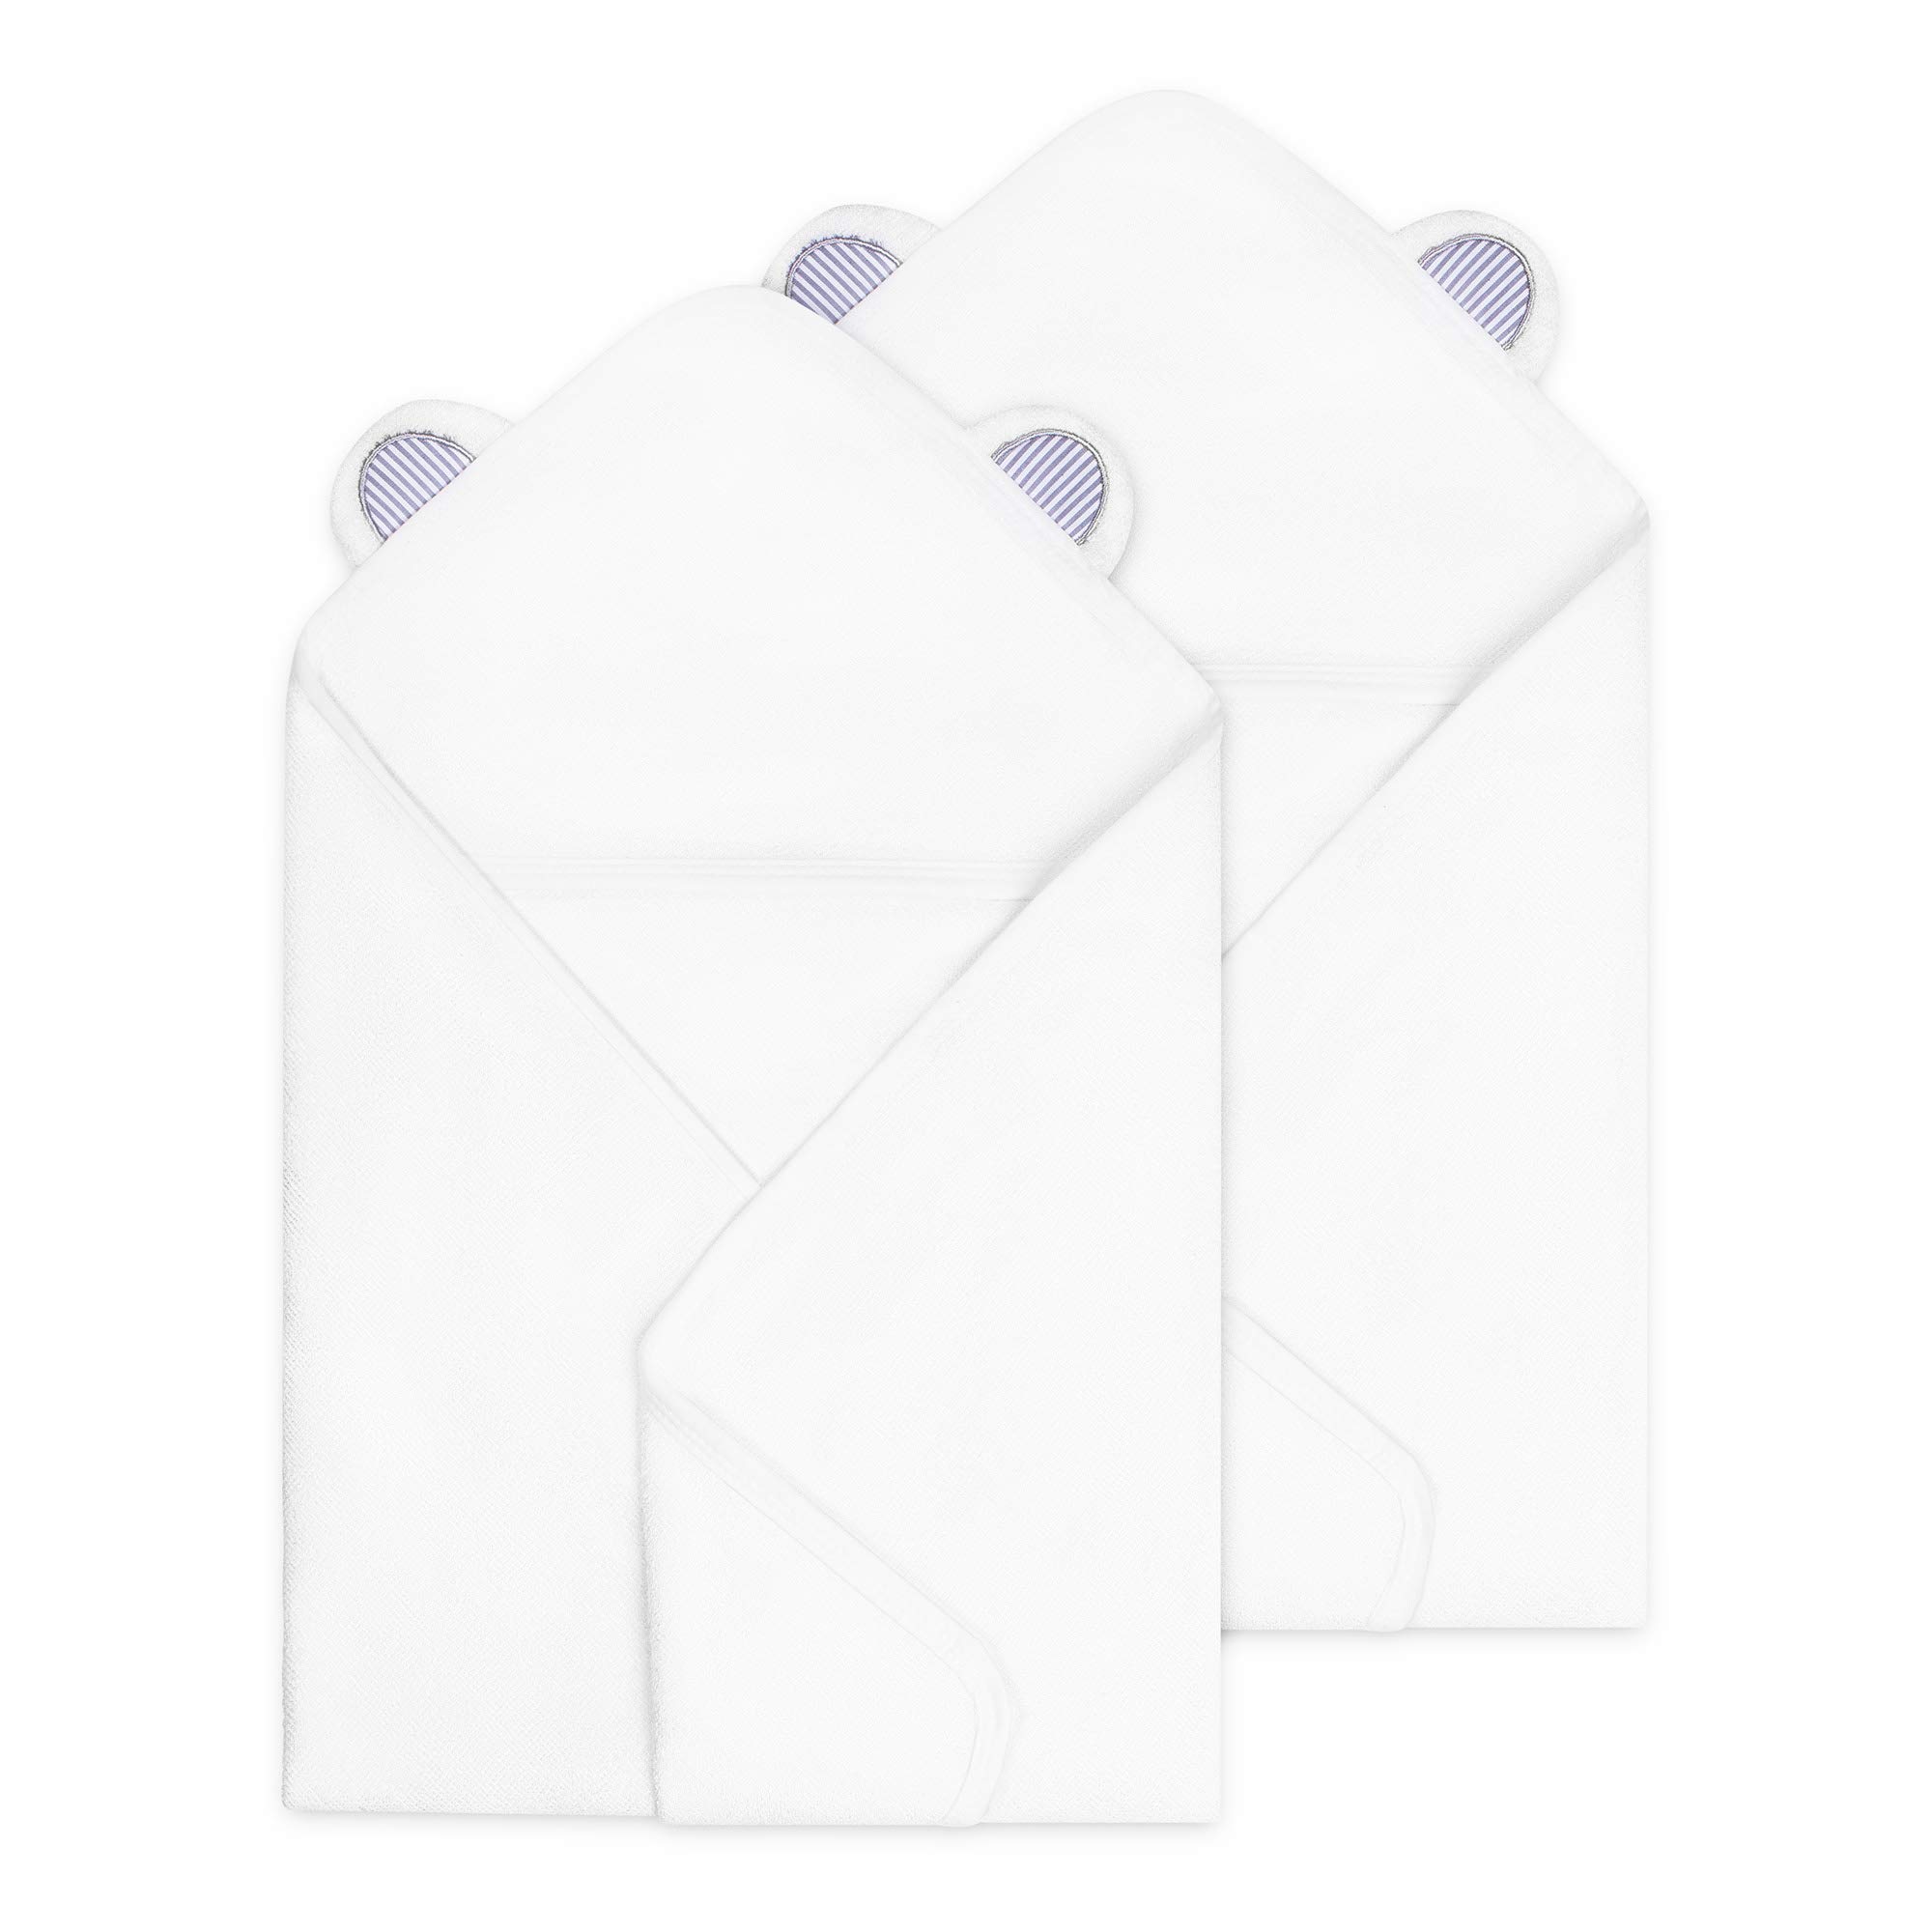 Toddlers and Infants Baby Towel 2 Pack